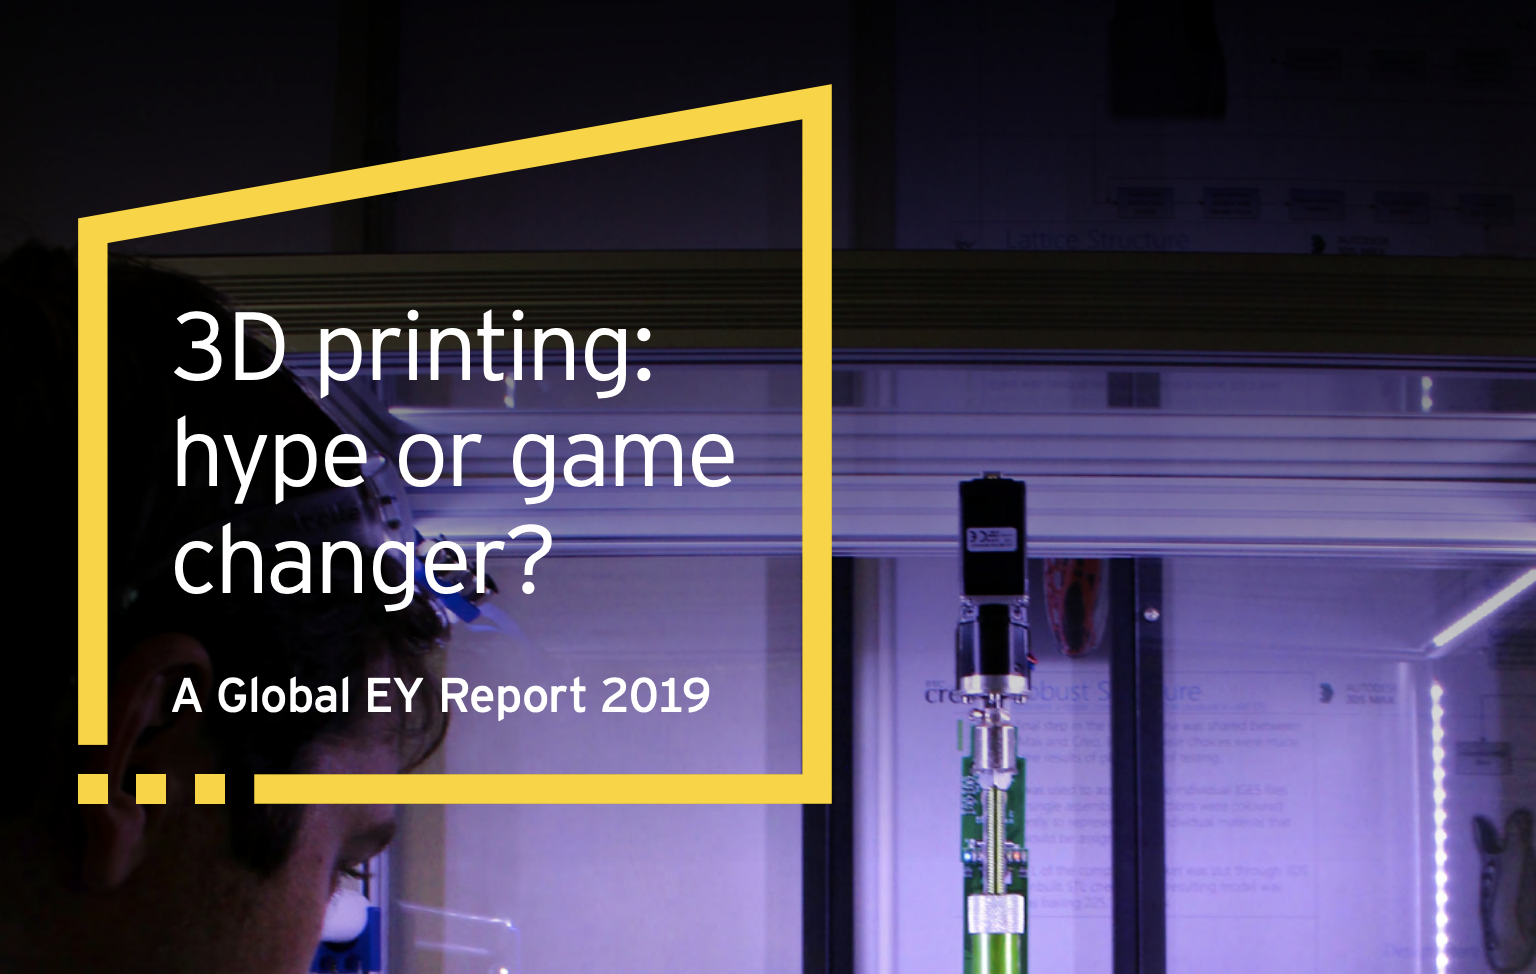 2019 Global EY Report on 3D Printing